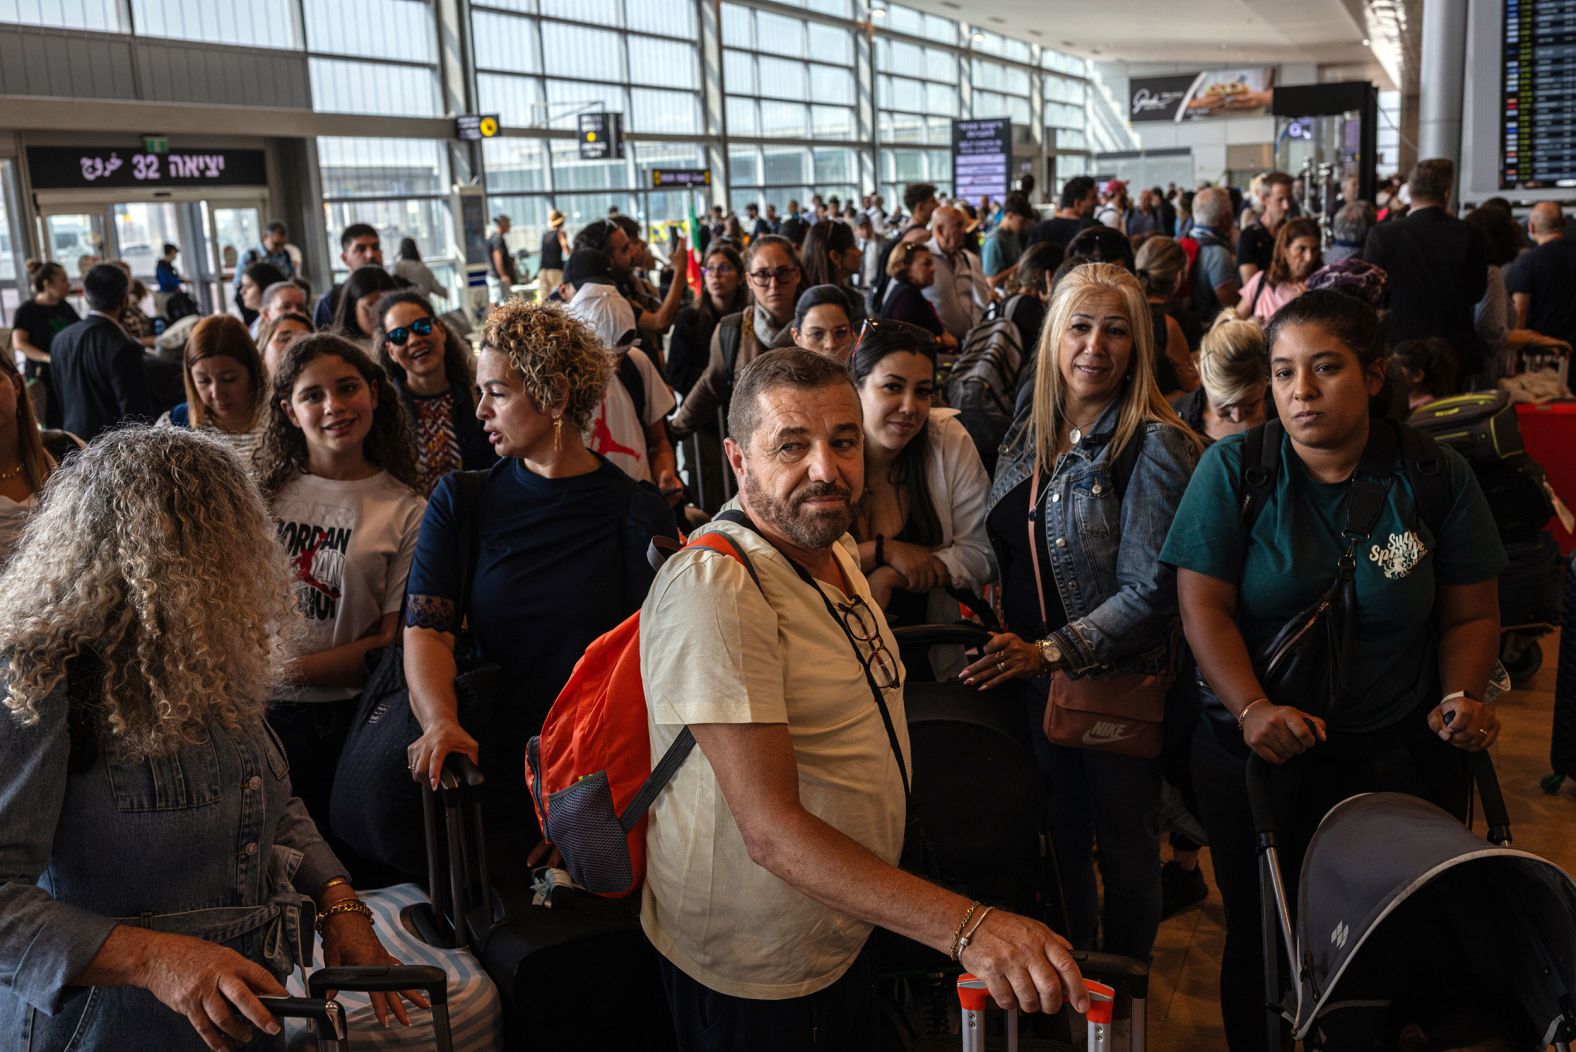 Stranded travelers wait to be booked on a flight at Ben Gurion International Airport outside Tel Aviv, Israel, on Monday, October 10.